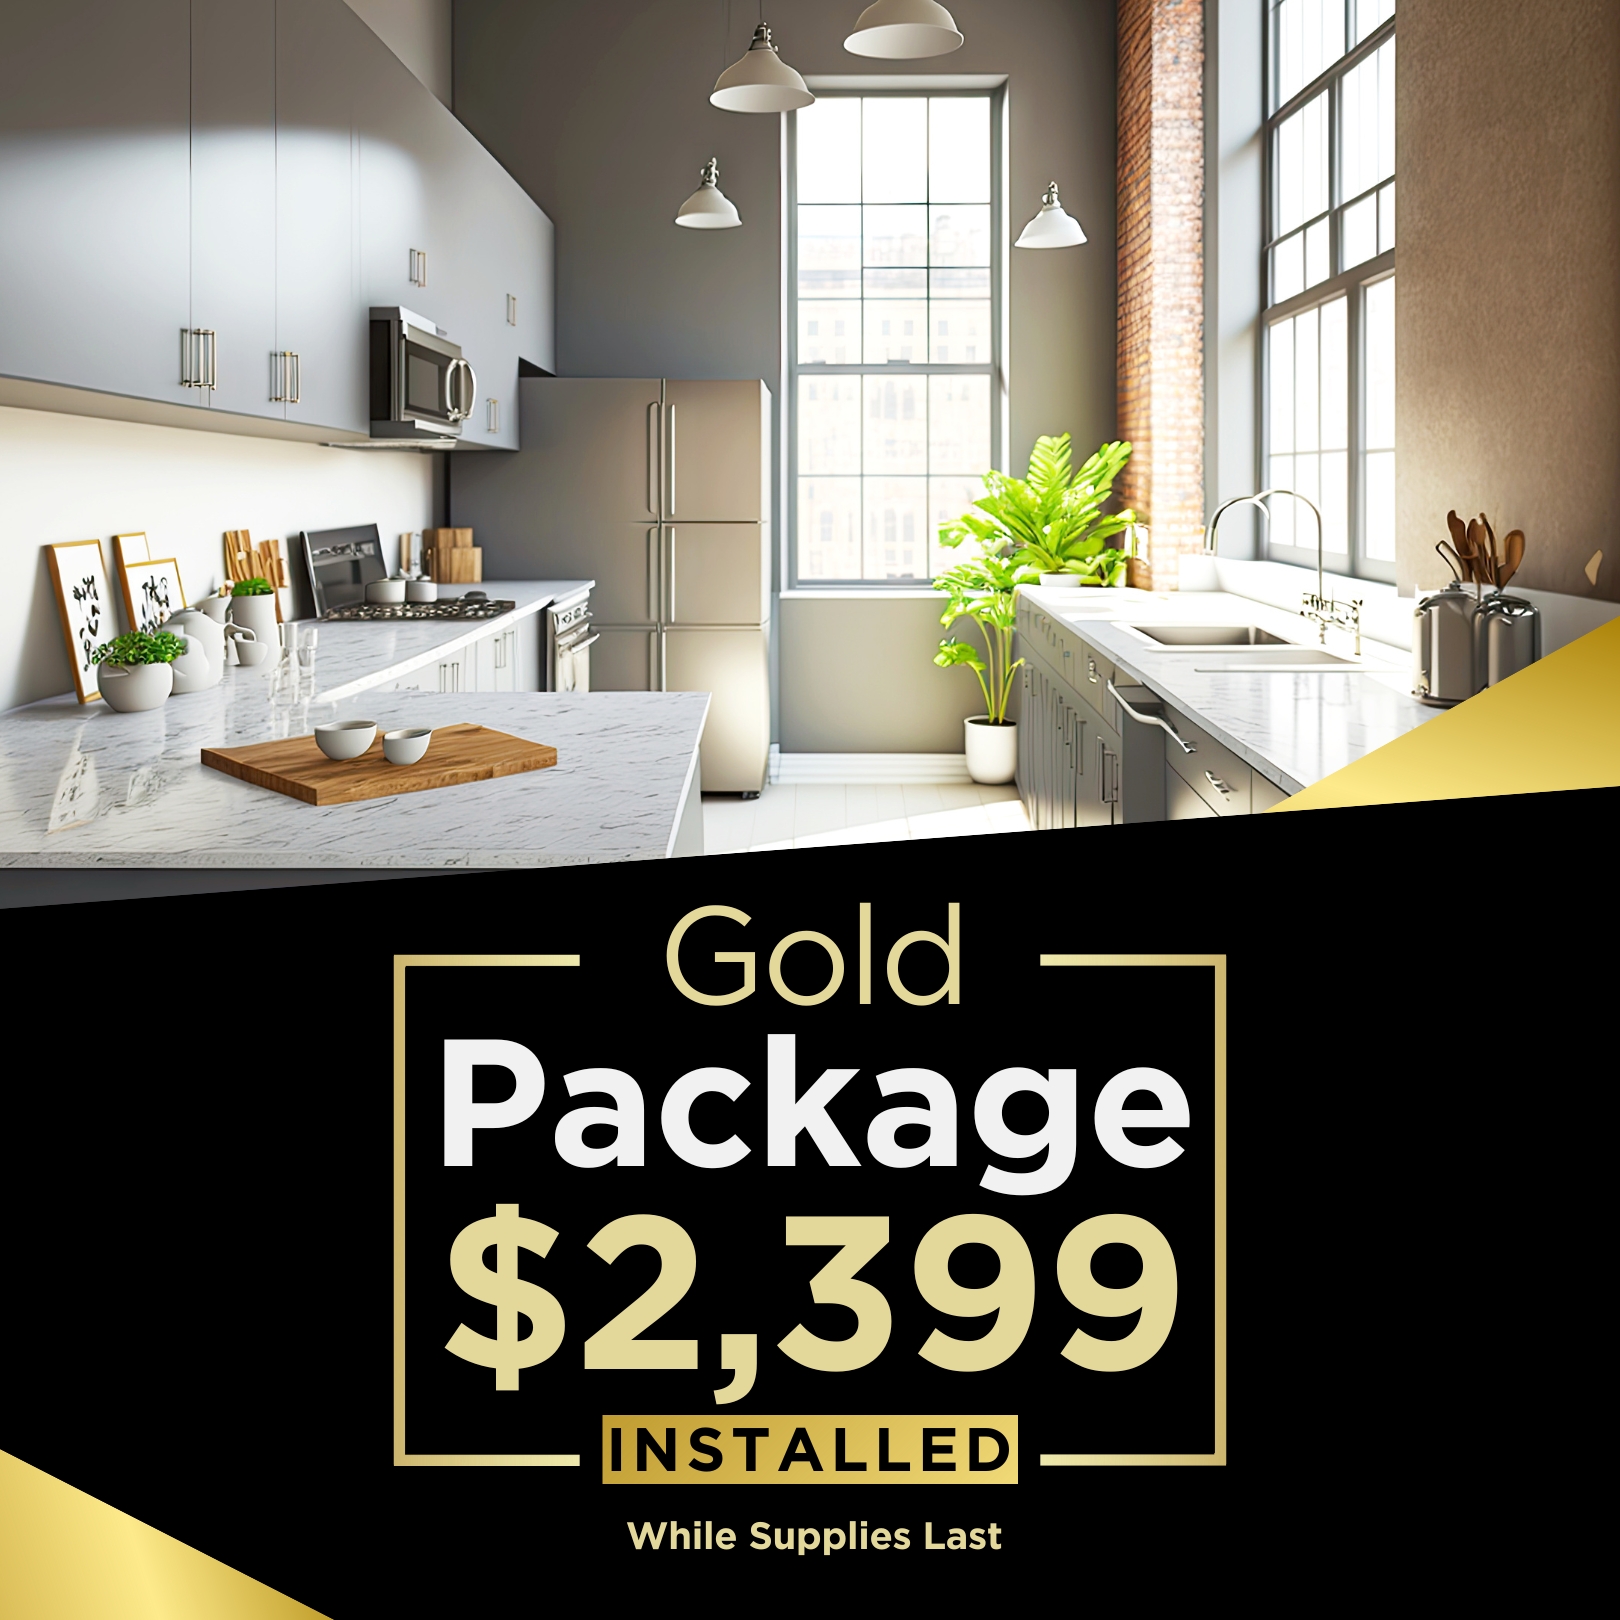 Charleston - Square - Gold Package $2,399